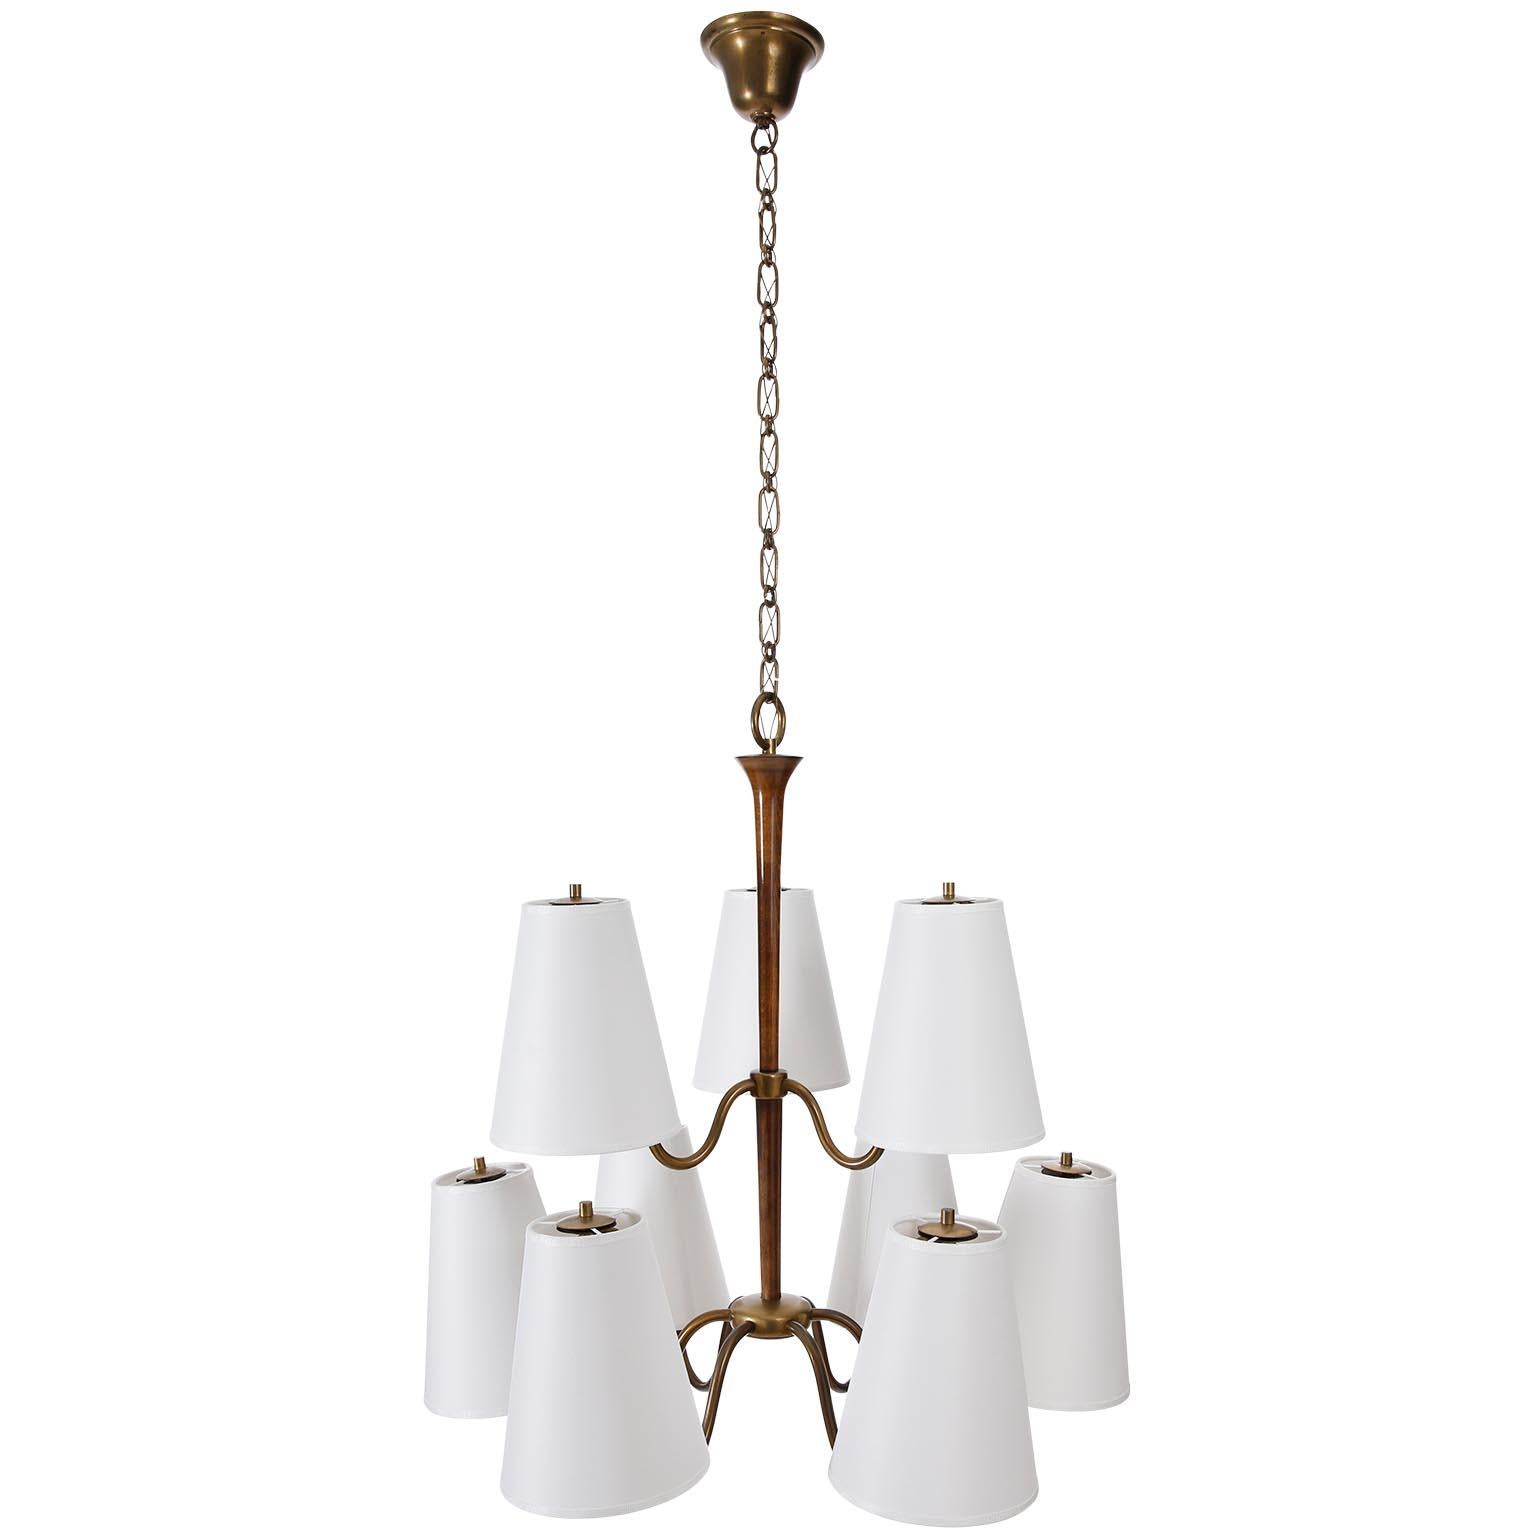 Mid-Century Modern Chandelier Pendant Light, Attributed to Josef Frank, Patinated Brass Wood, 1930s